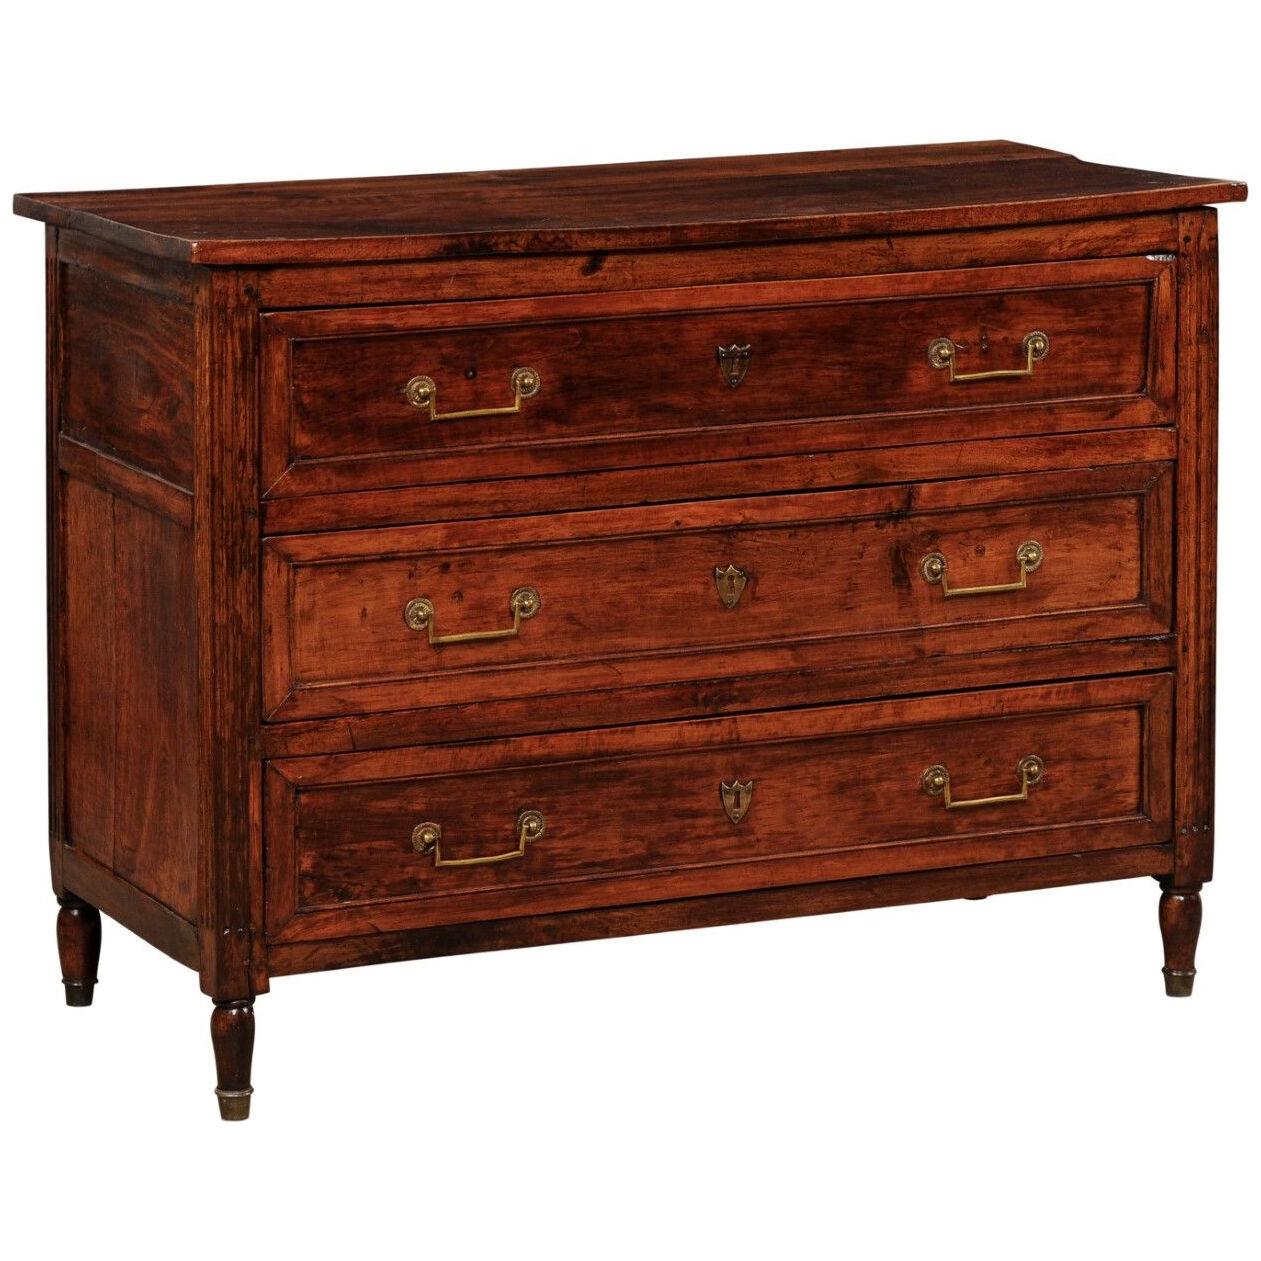 Early 19th C. French 3 Drawer Commode